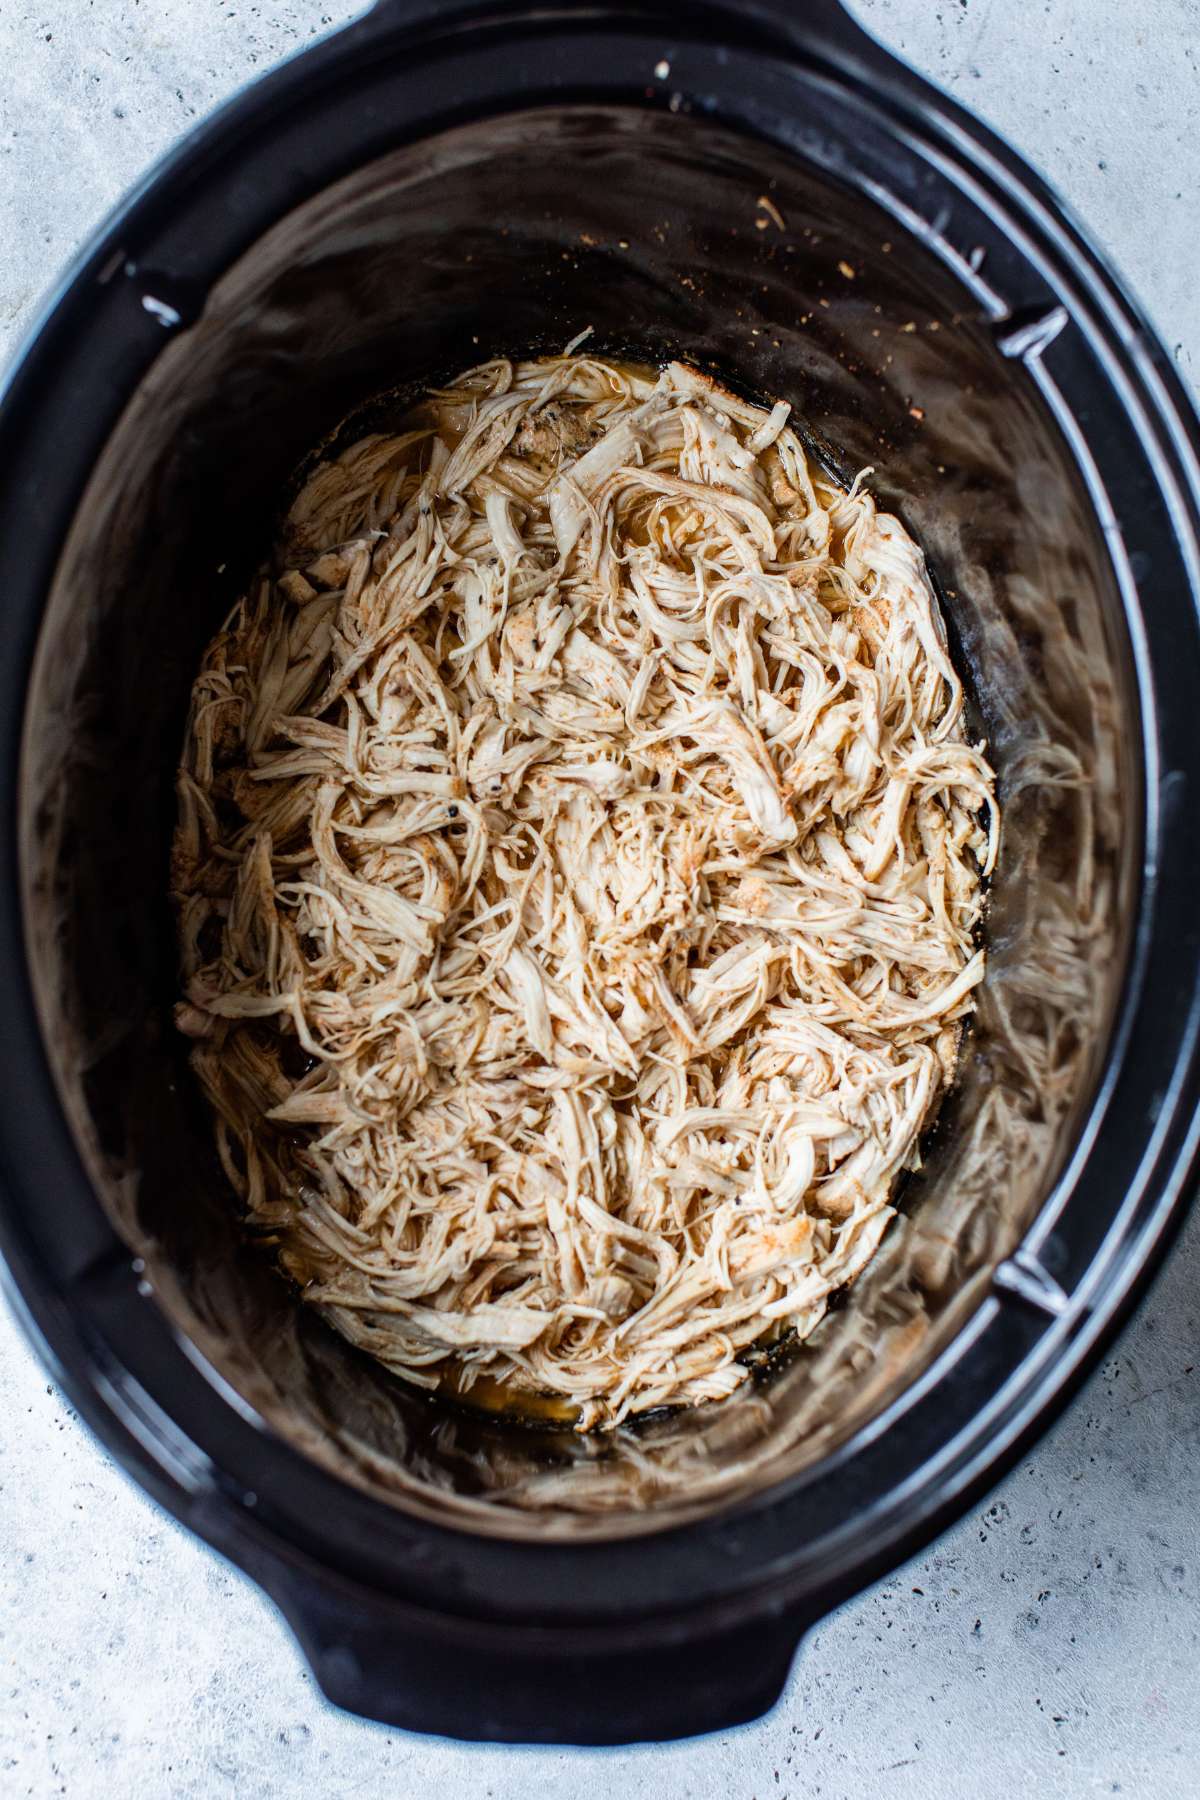 Shredded chicken in a slow cooker.